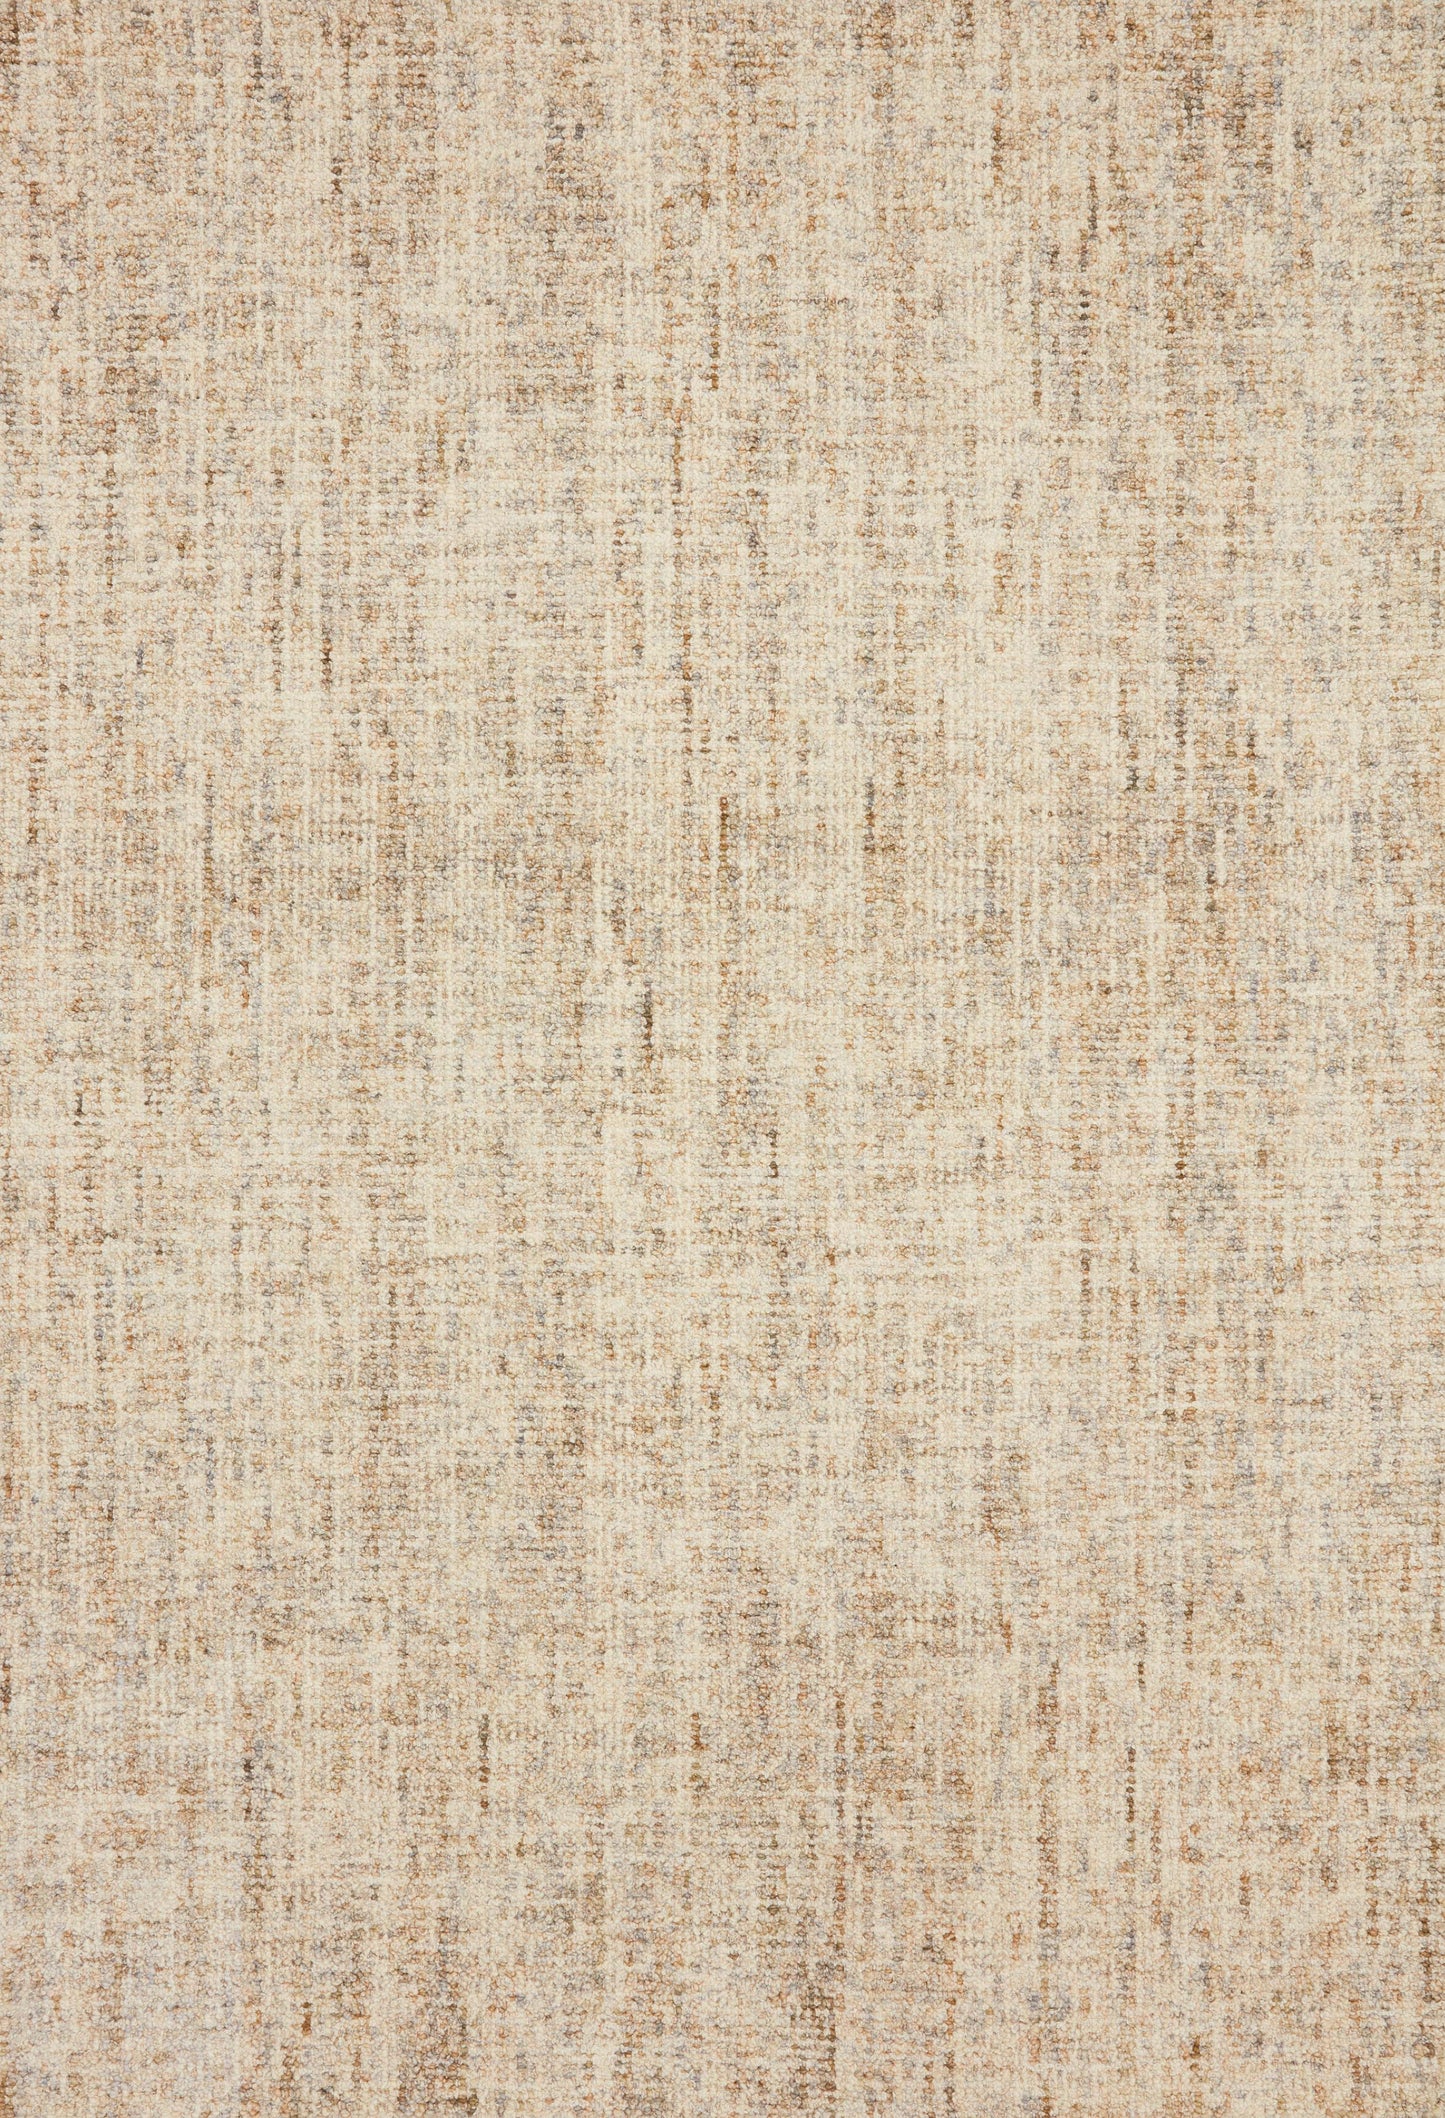 A picture of Loloi's Harlow rug, in style HLO-01, color Sand / Stone